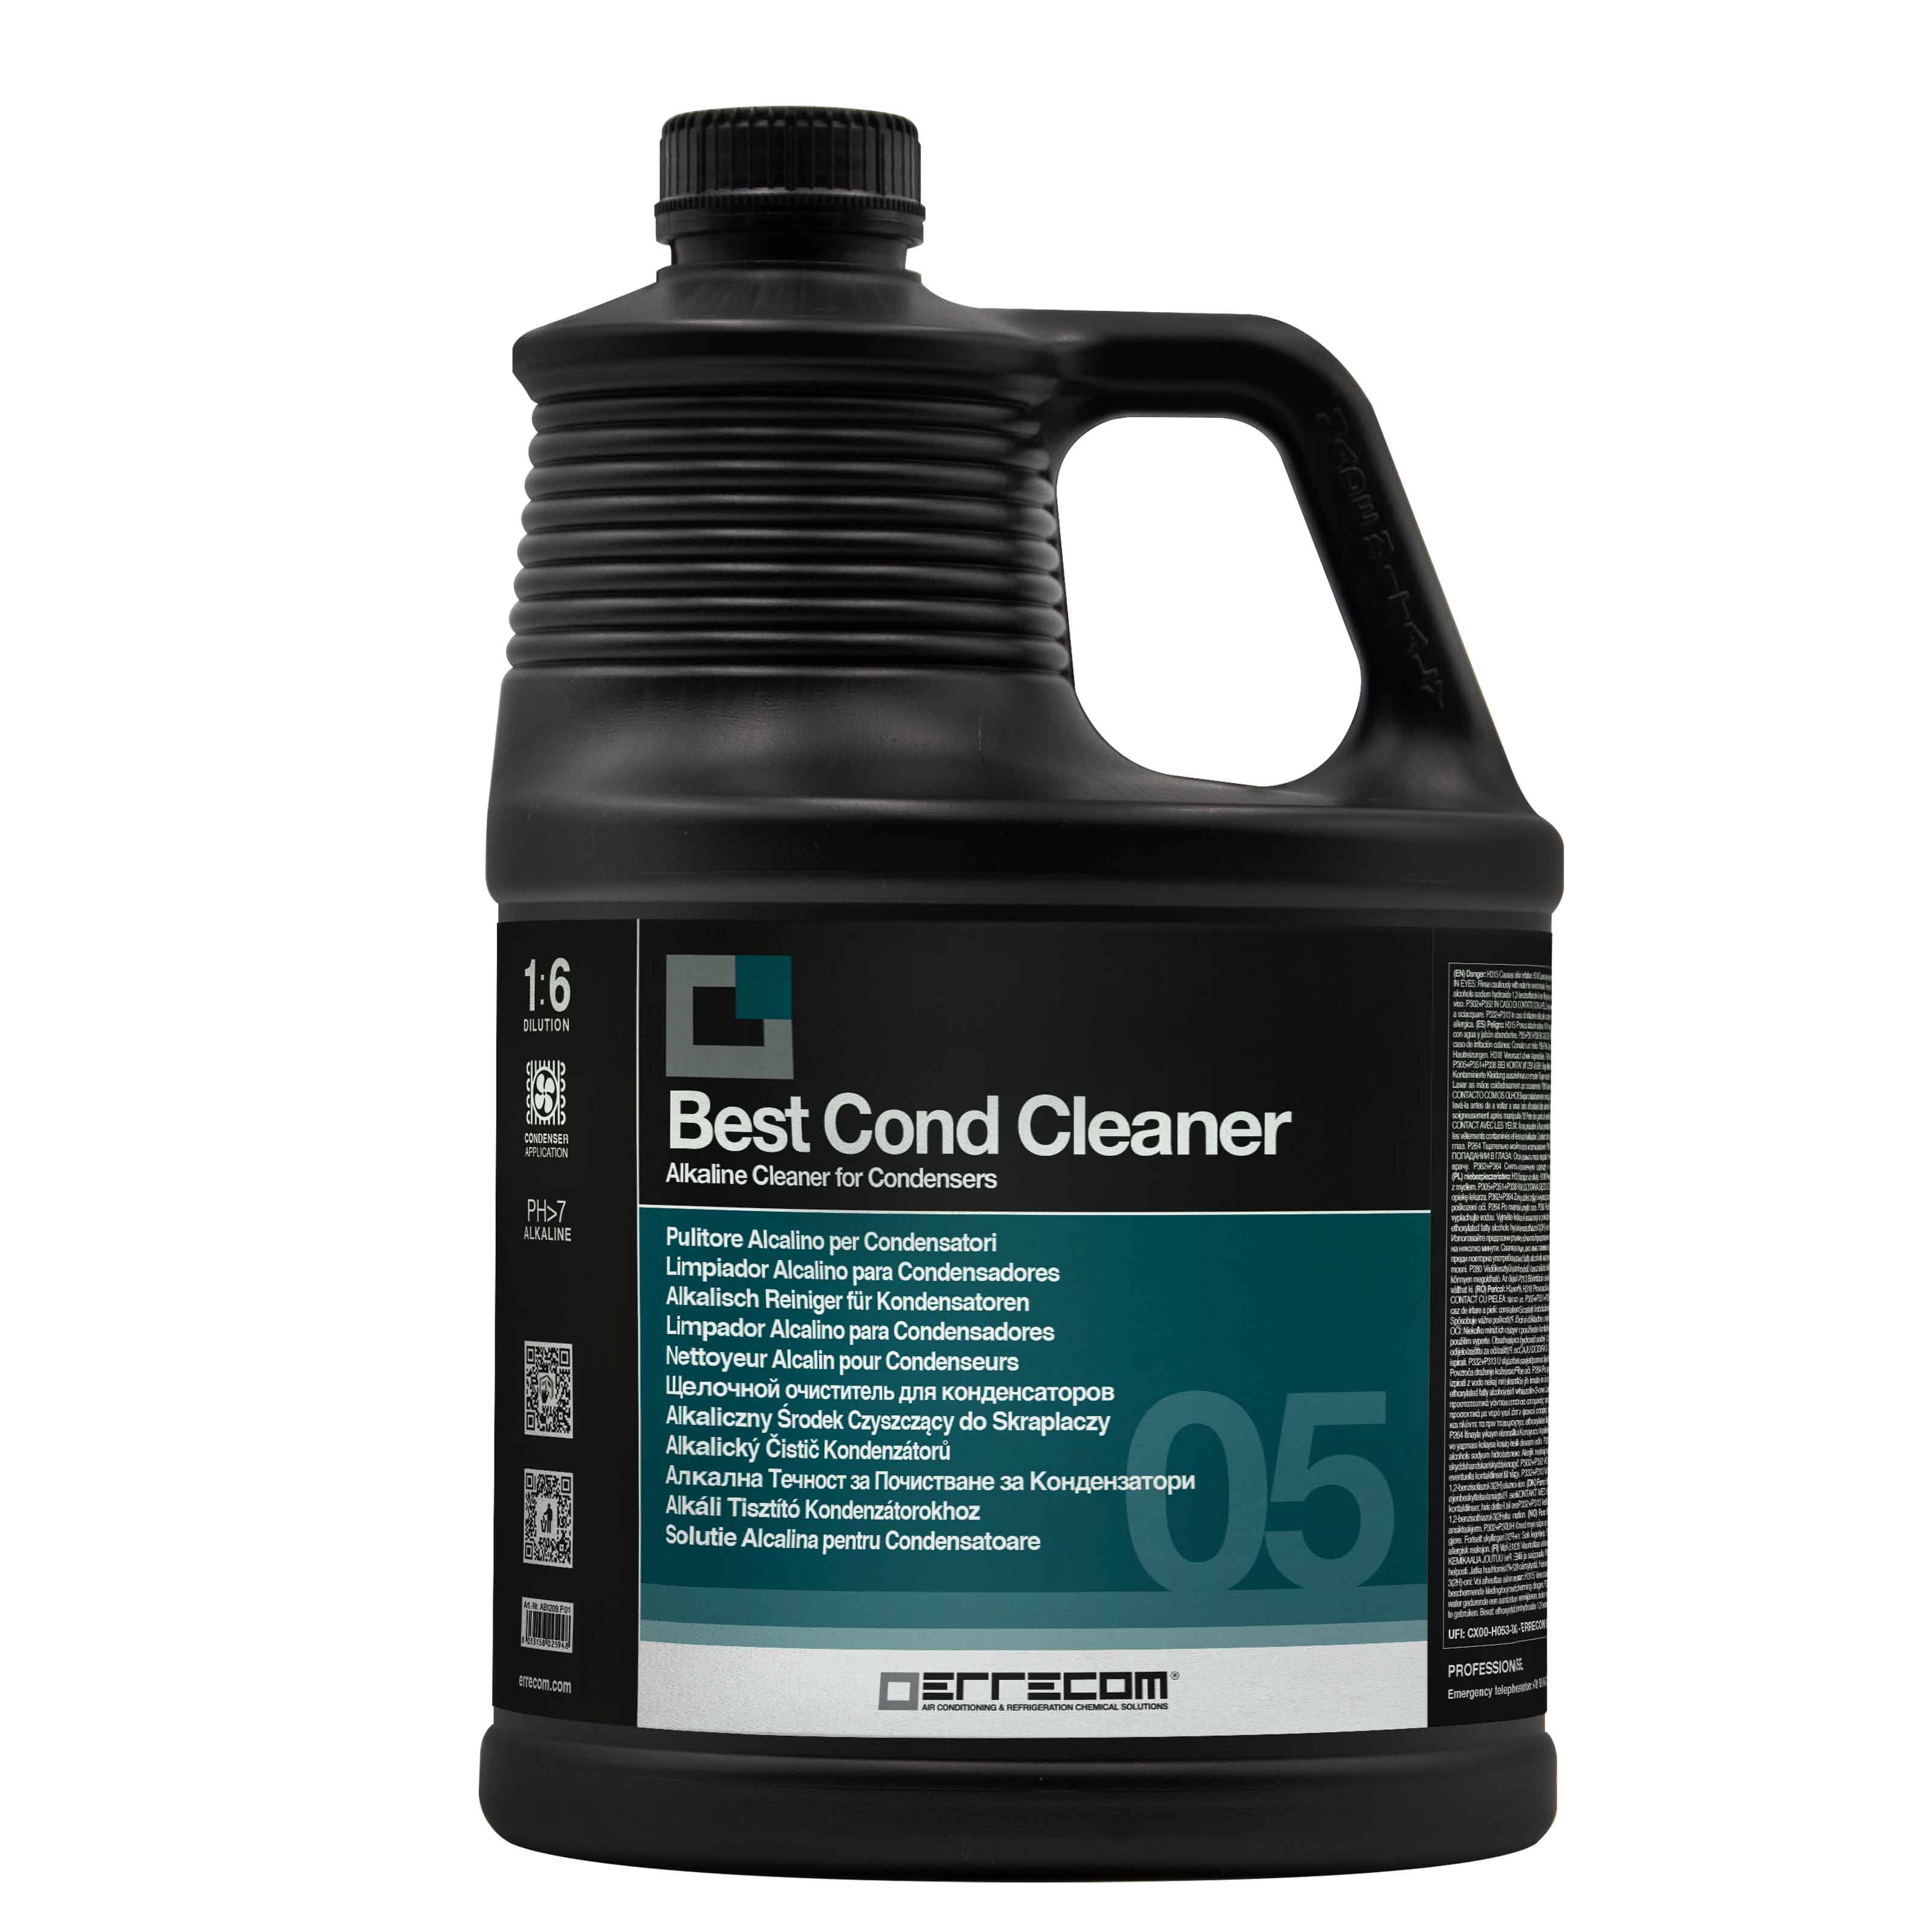 2 x Concentrated Condenser Alkaline Liquid Cleaner - BEST COND CLEANER - 5 lt - Package # 2 pcs.